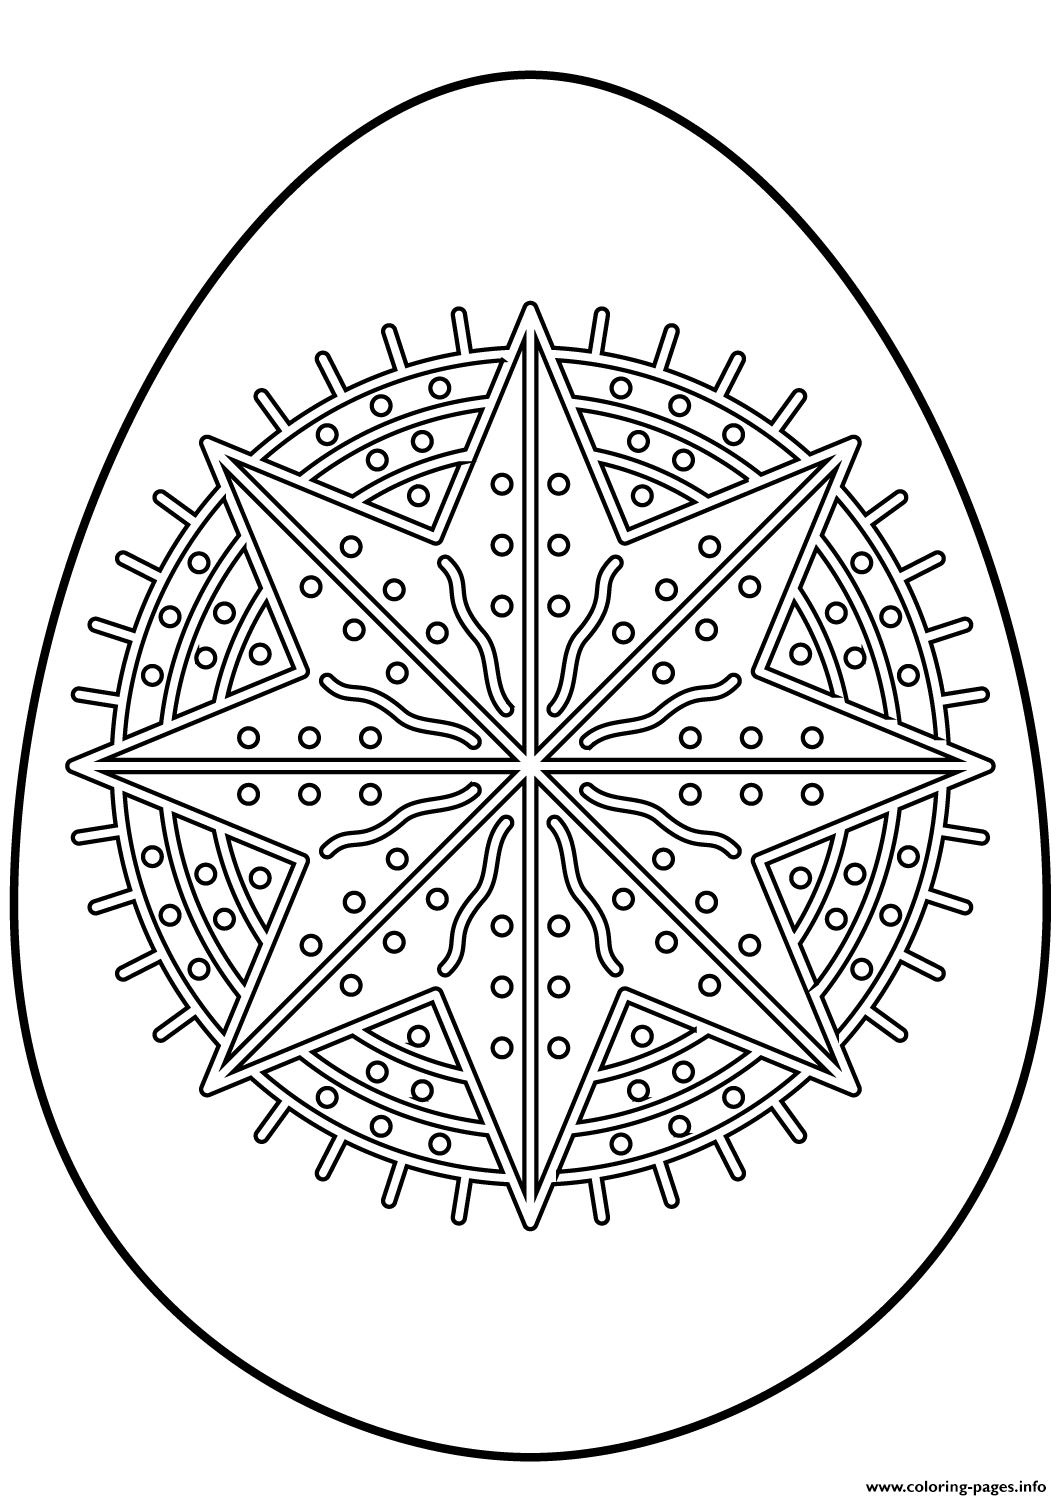 Easter Egg With Octagram Star coloring